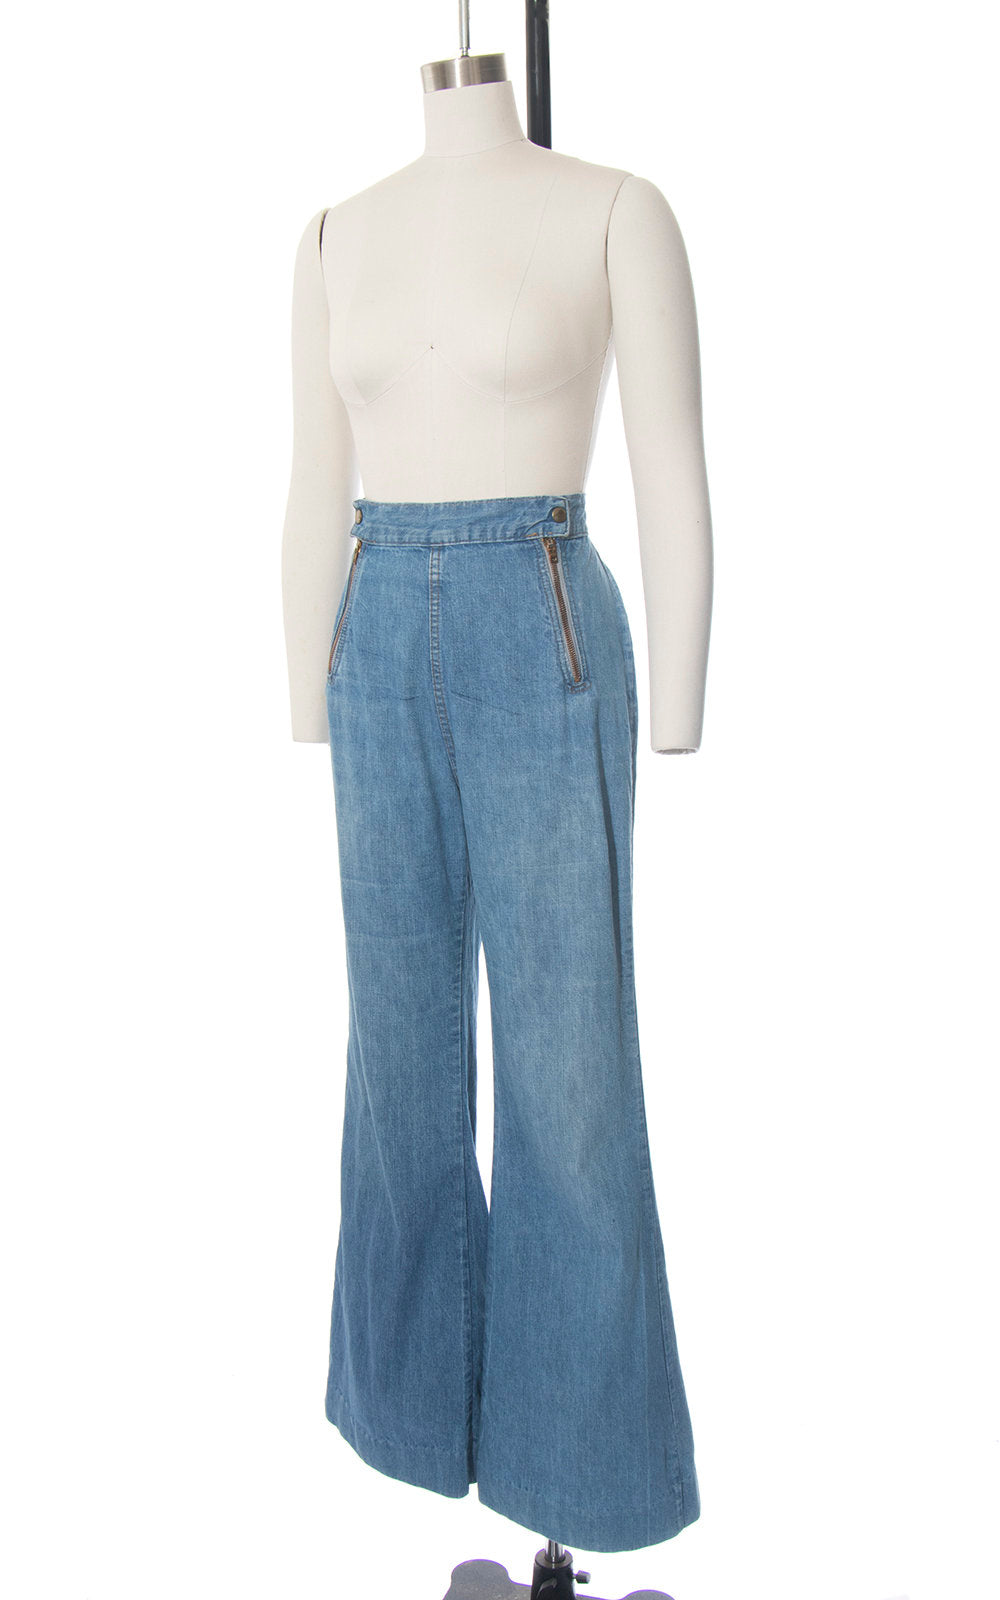 Vintage 1970s Bell Bottoms | 70s Double Zippered Light Blue Wash Denim Jeans High Waisted Distressed Flared Pants (medium)